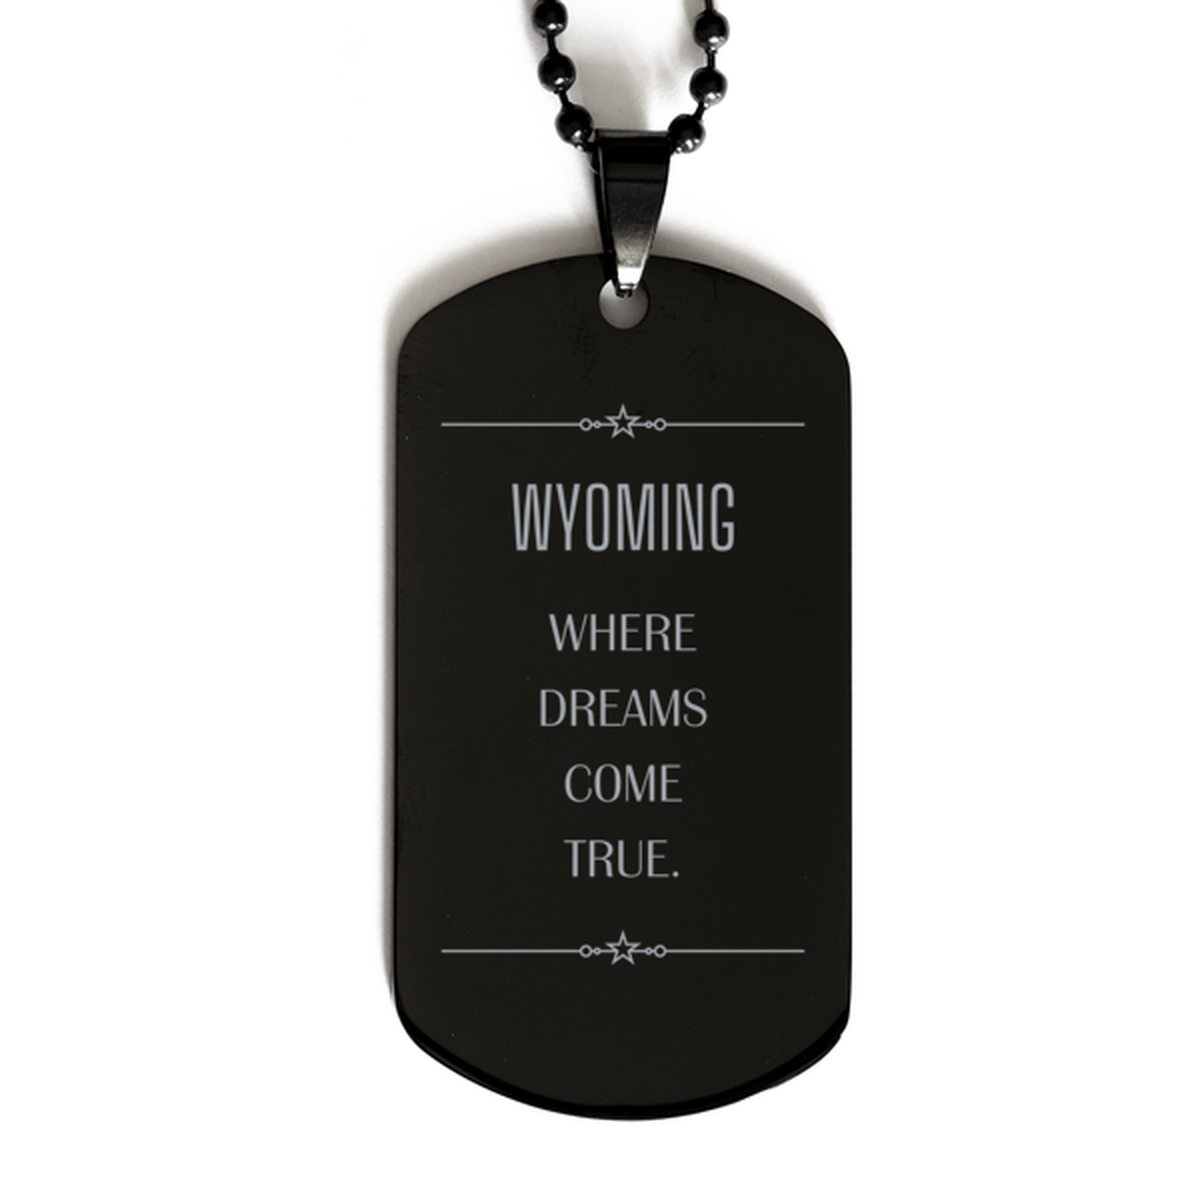 Love Wyoming State Black Dog Tag, Wyoming Where dreams come true, Birthday Inspirational Gifts For Wyoming Men, Women, Friends